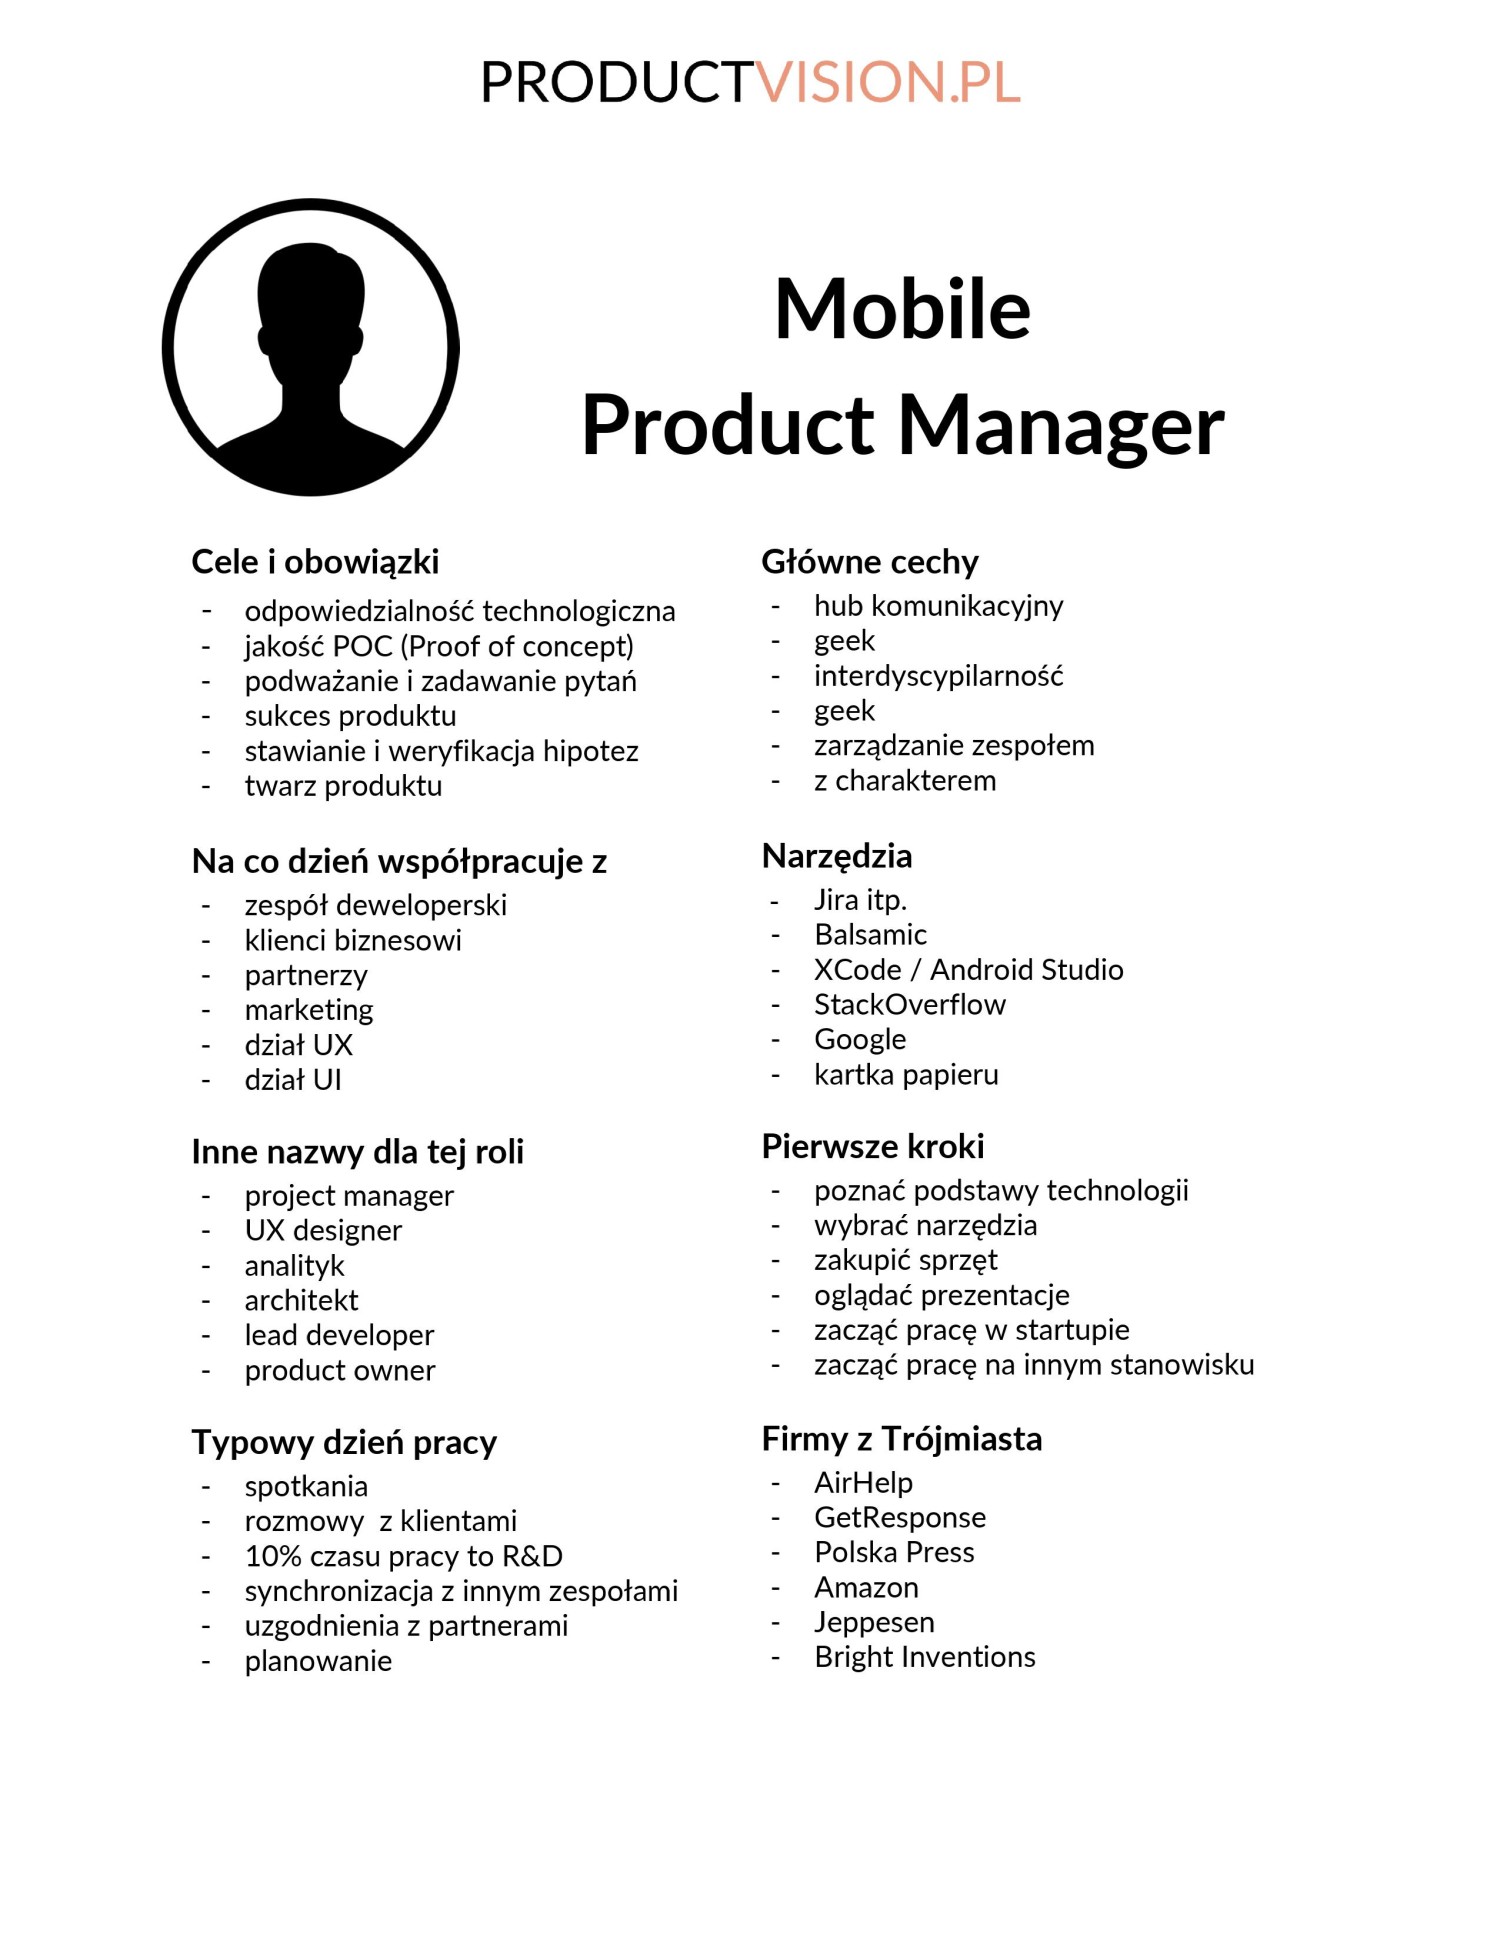 Persona - Mobile Product Manager